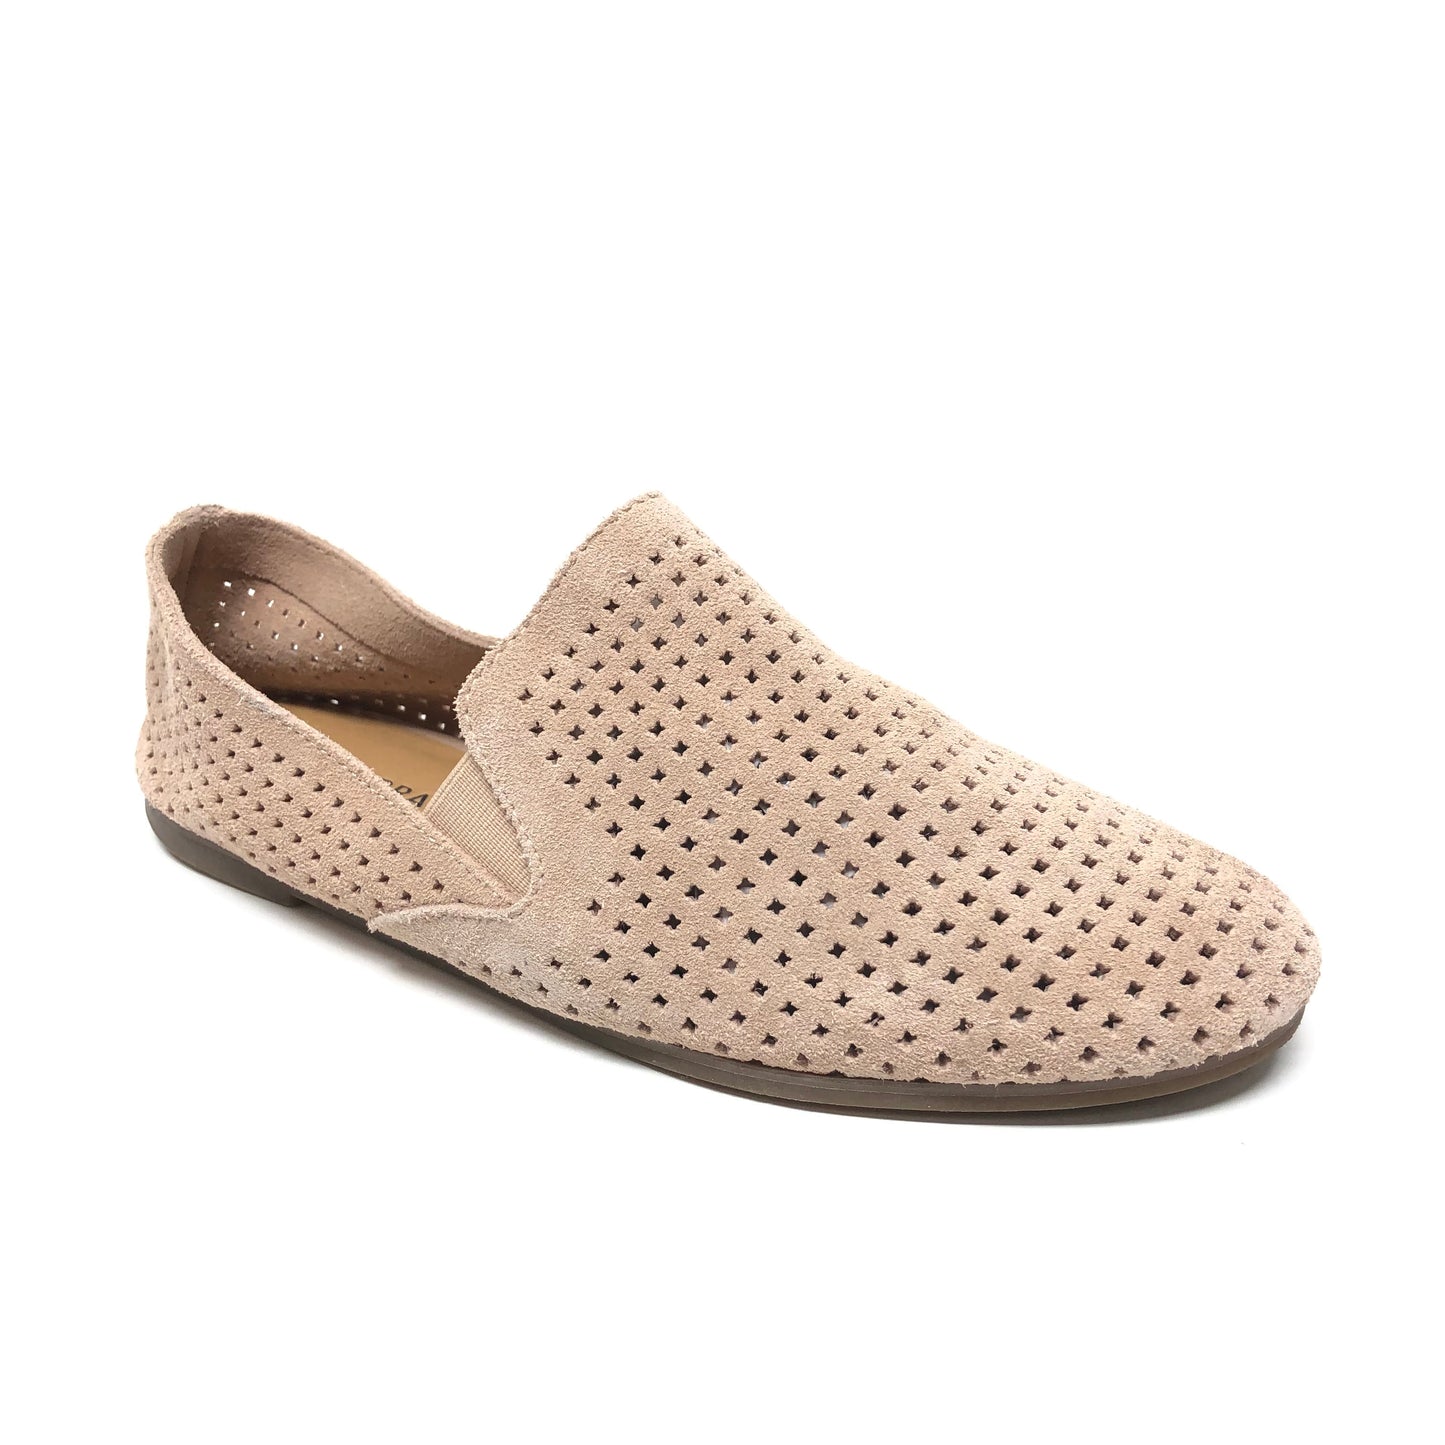 Beige Shoes Flats Lucky Brand, Size 9